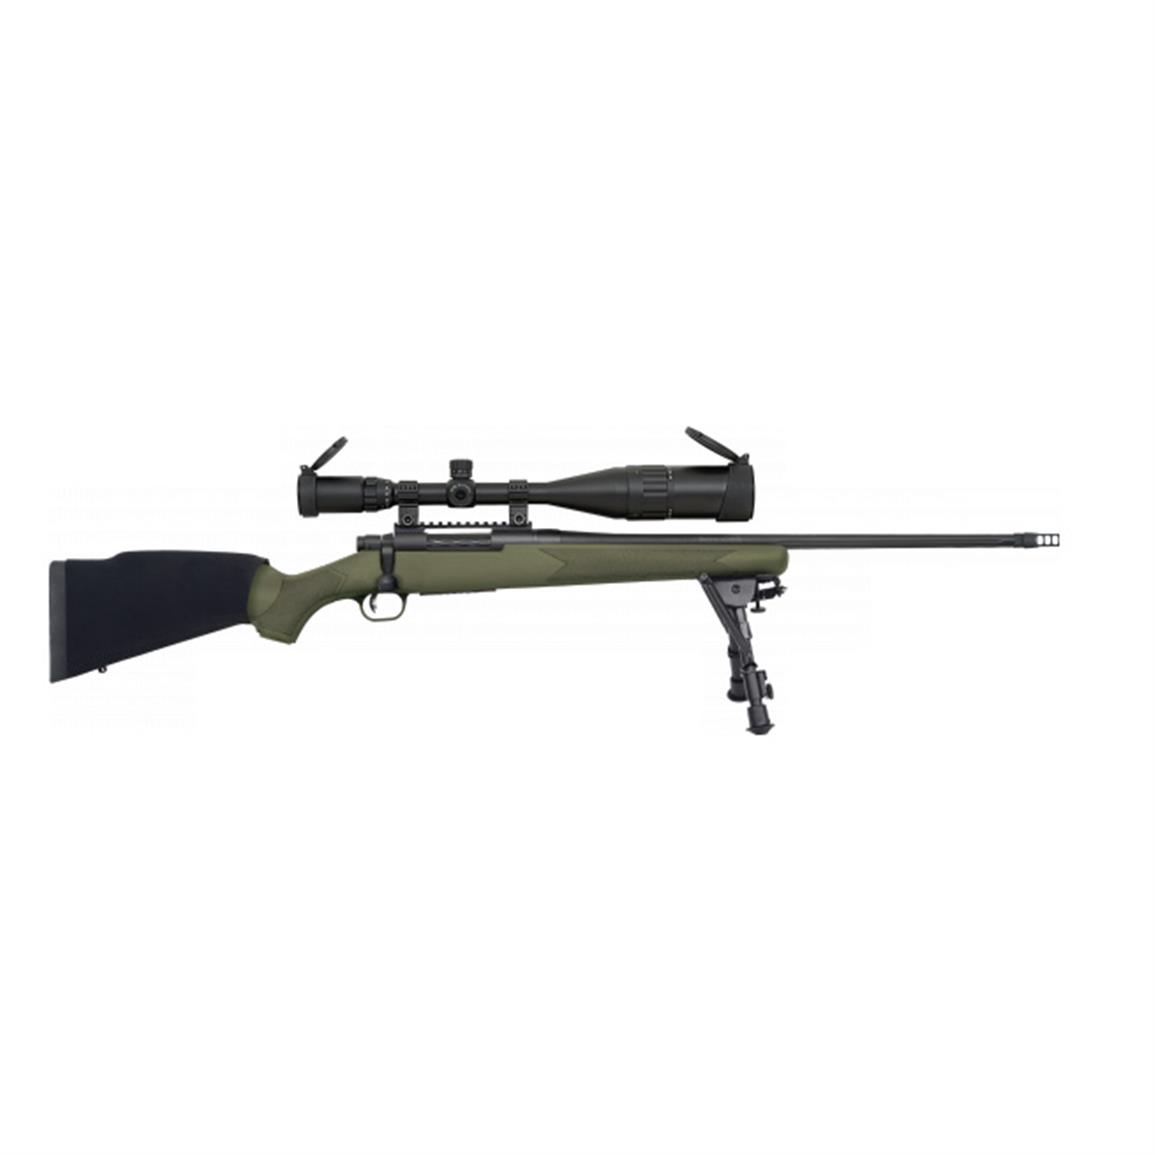 Mossberg Patriot Night Train Combo, Bolt Action, .308 Winchester, 6-24x50mm Scope, 5 Rounds